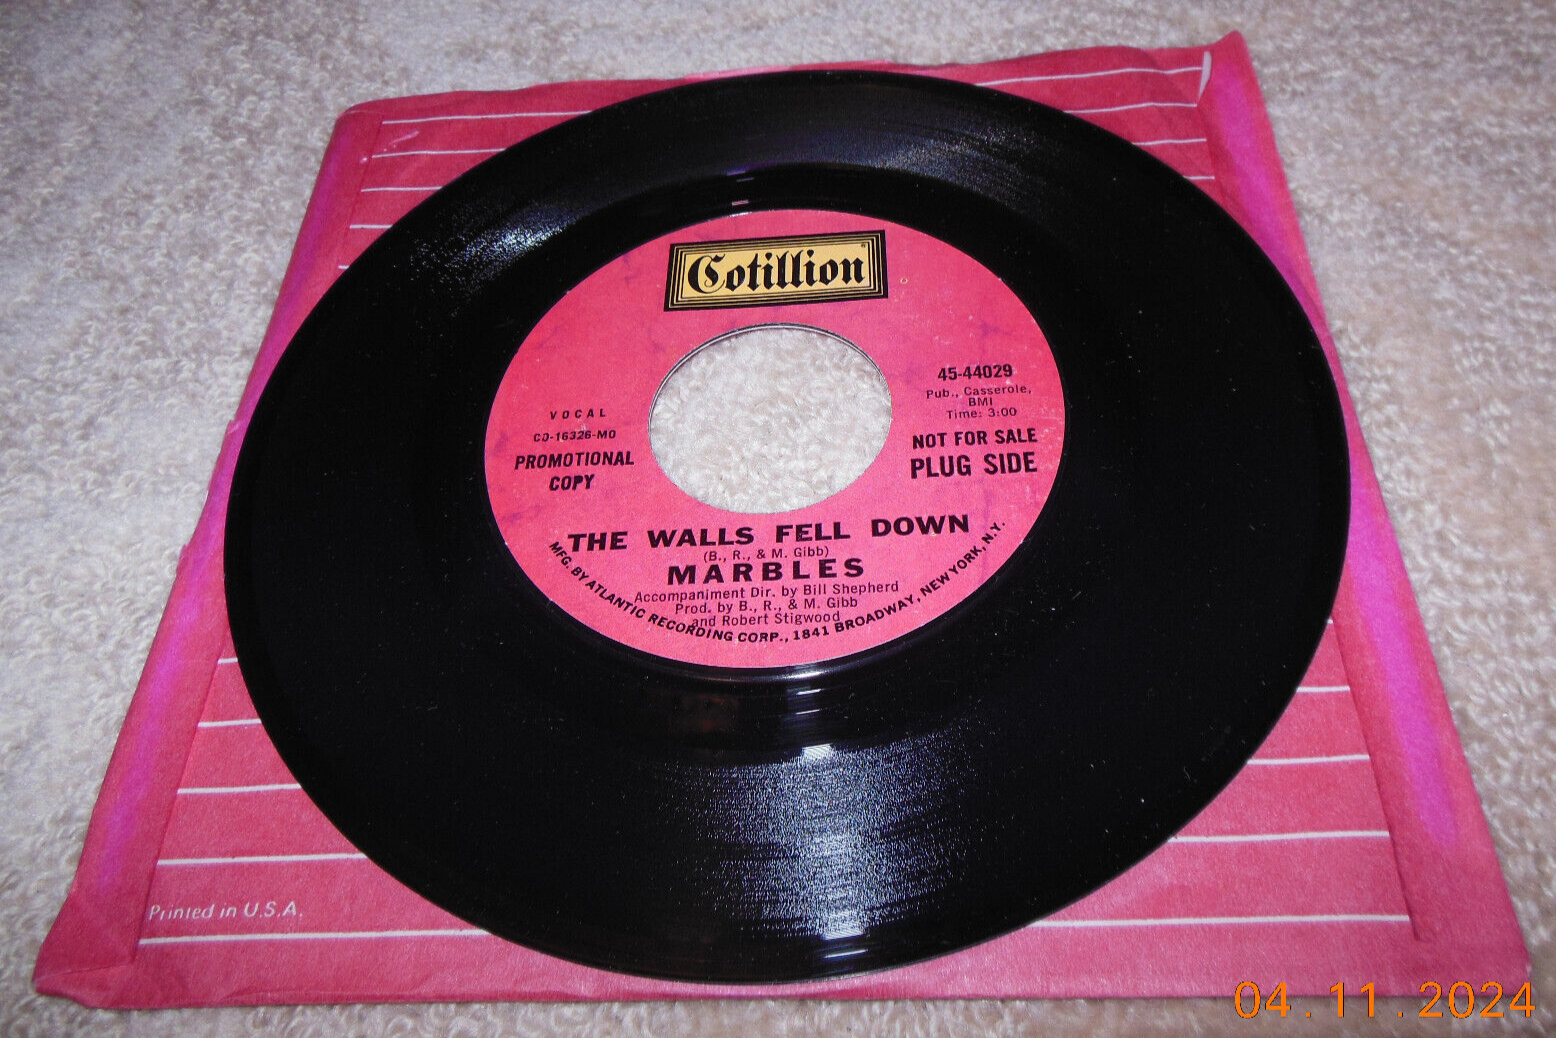 1969 Marbles 7" PROMO record RARE Bee Gees cover songs Barry Robin Maurice Gibb